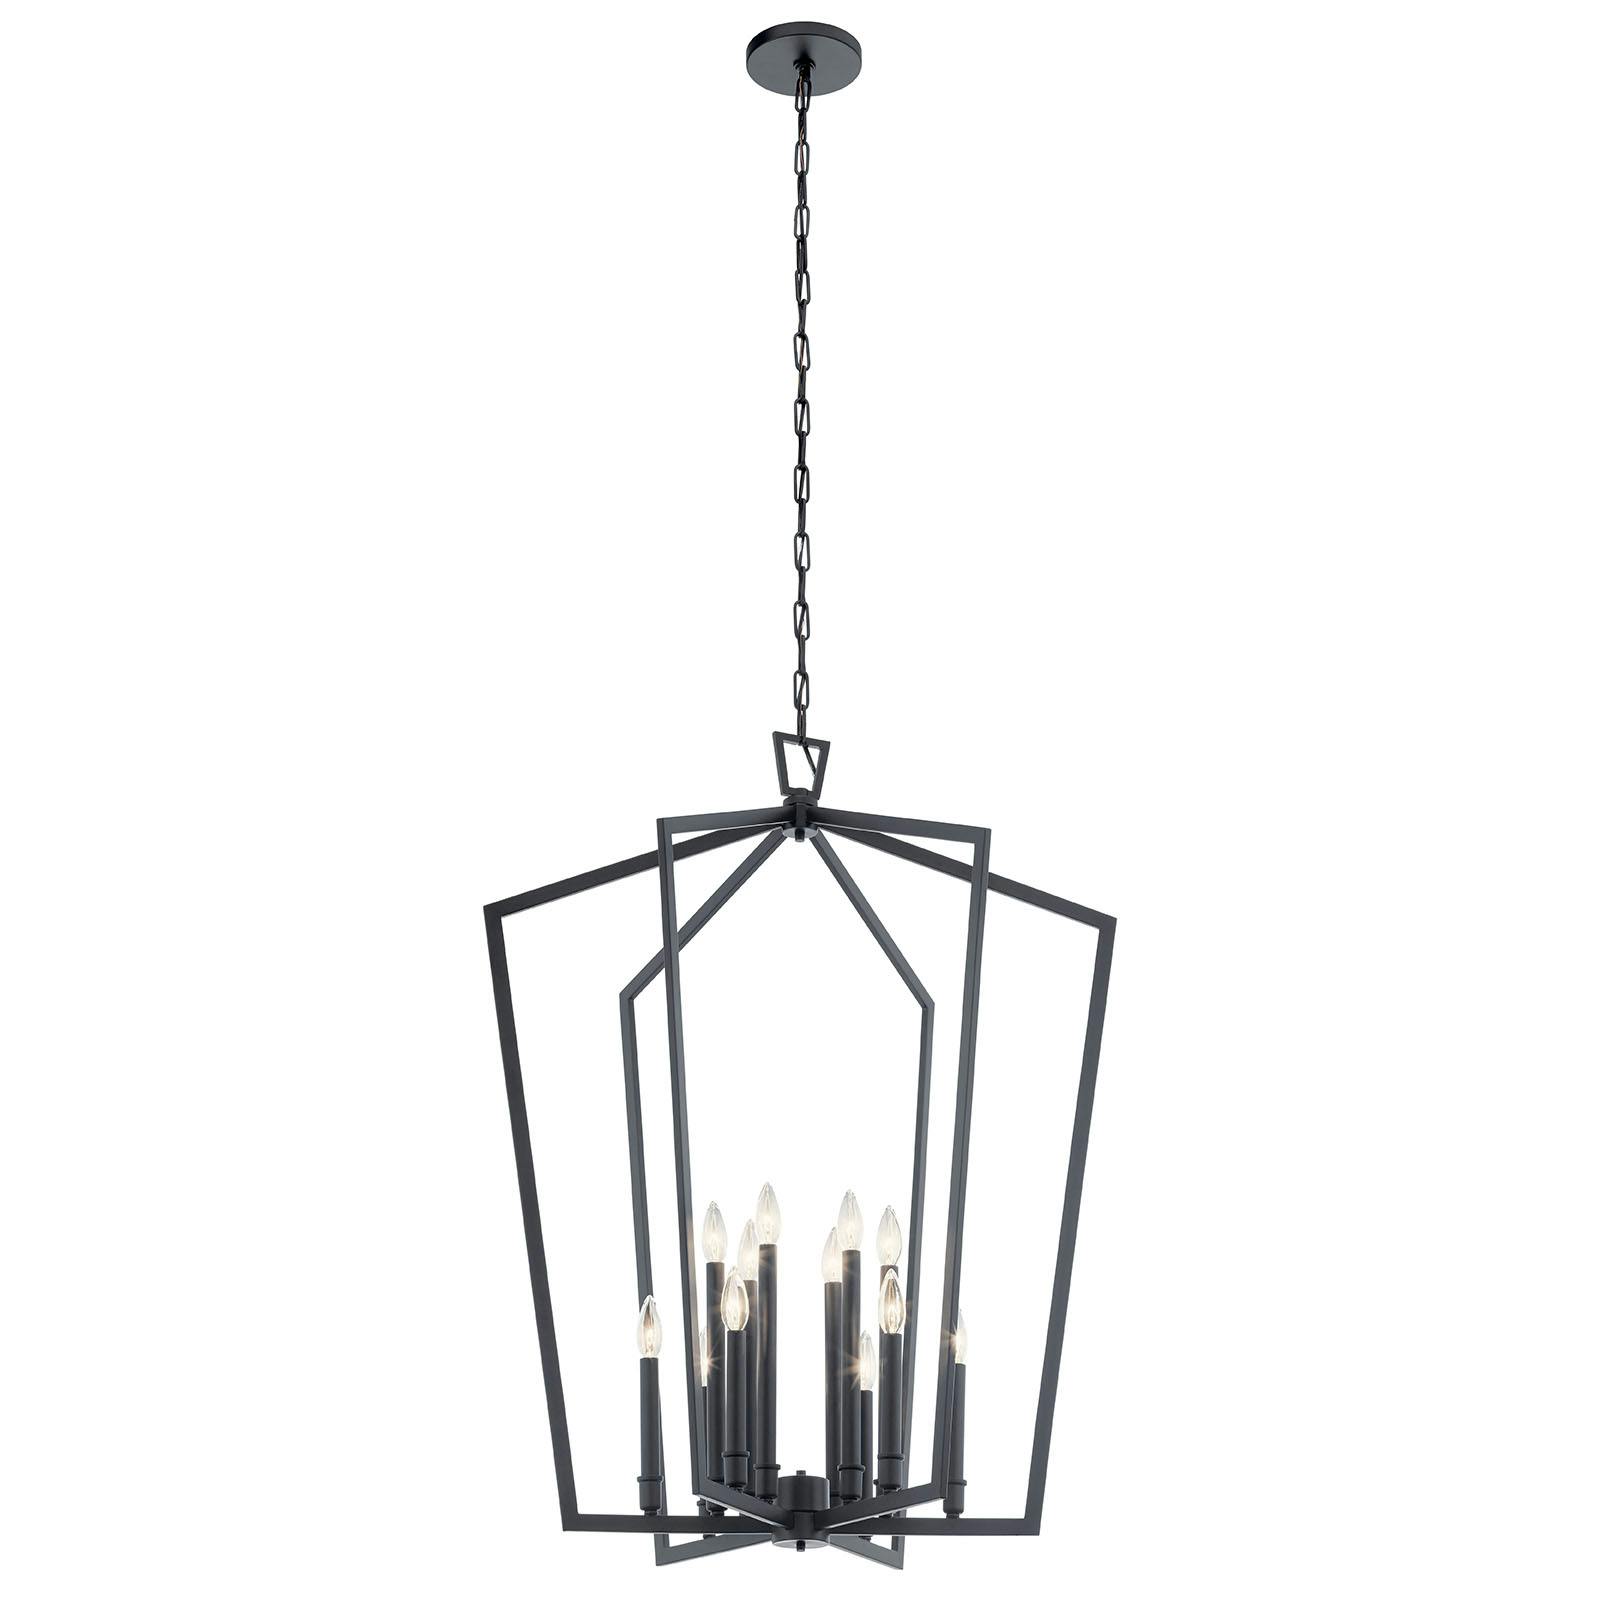 Abbotswell 30" Foyer Chandelier Black on a white background